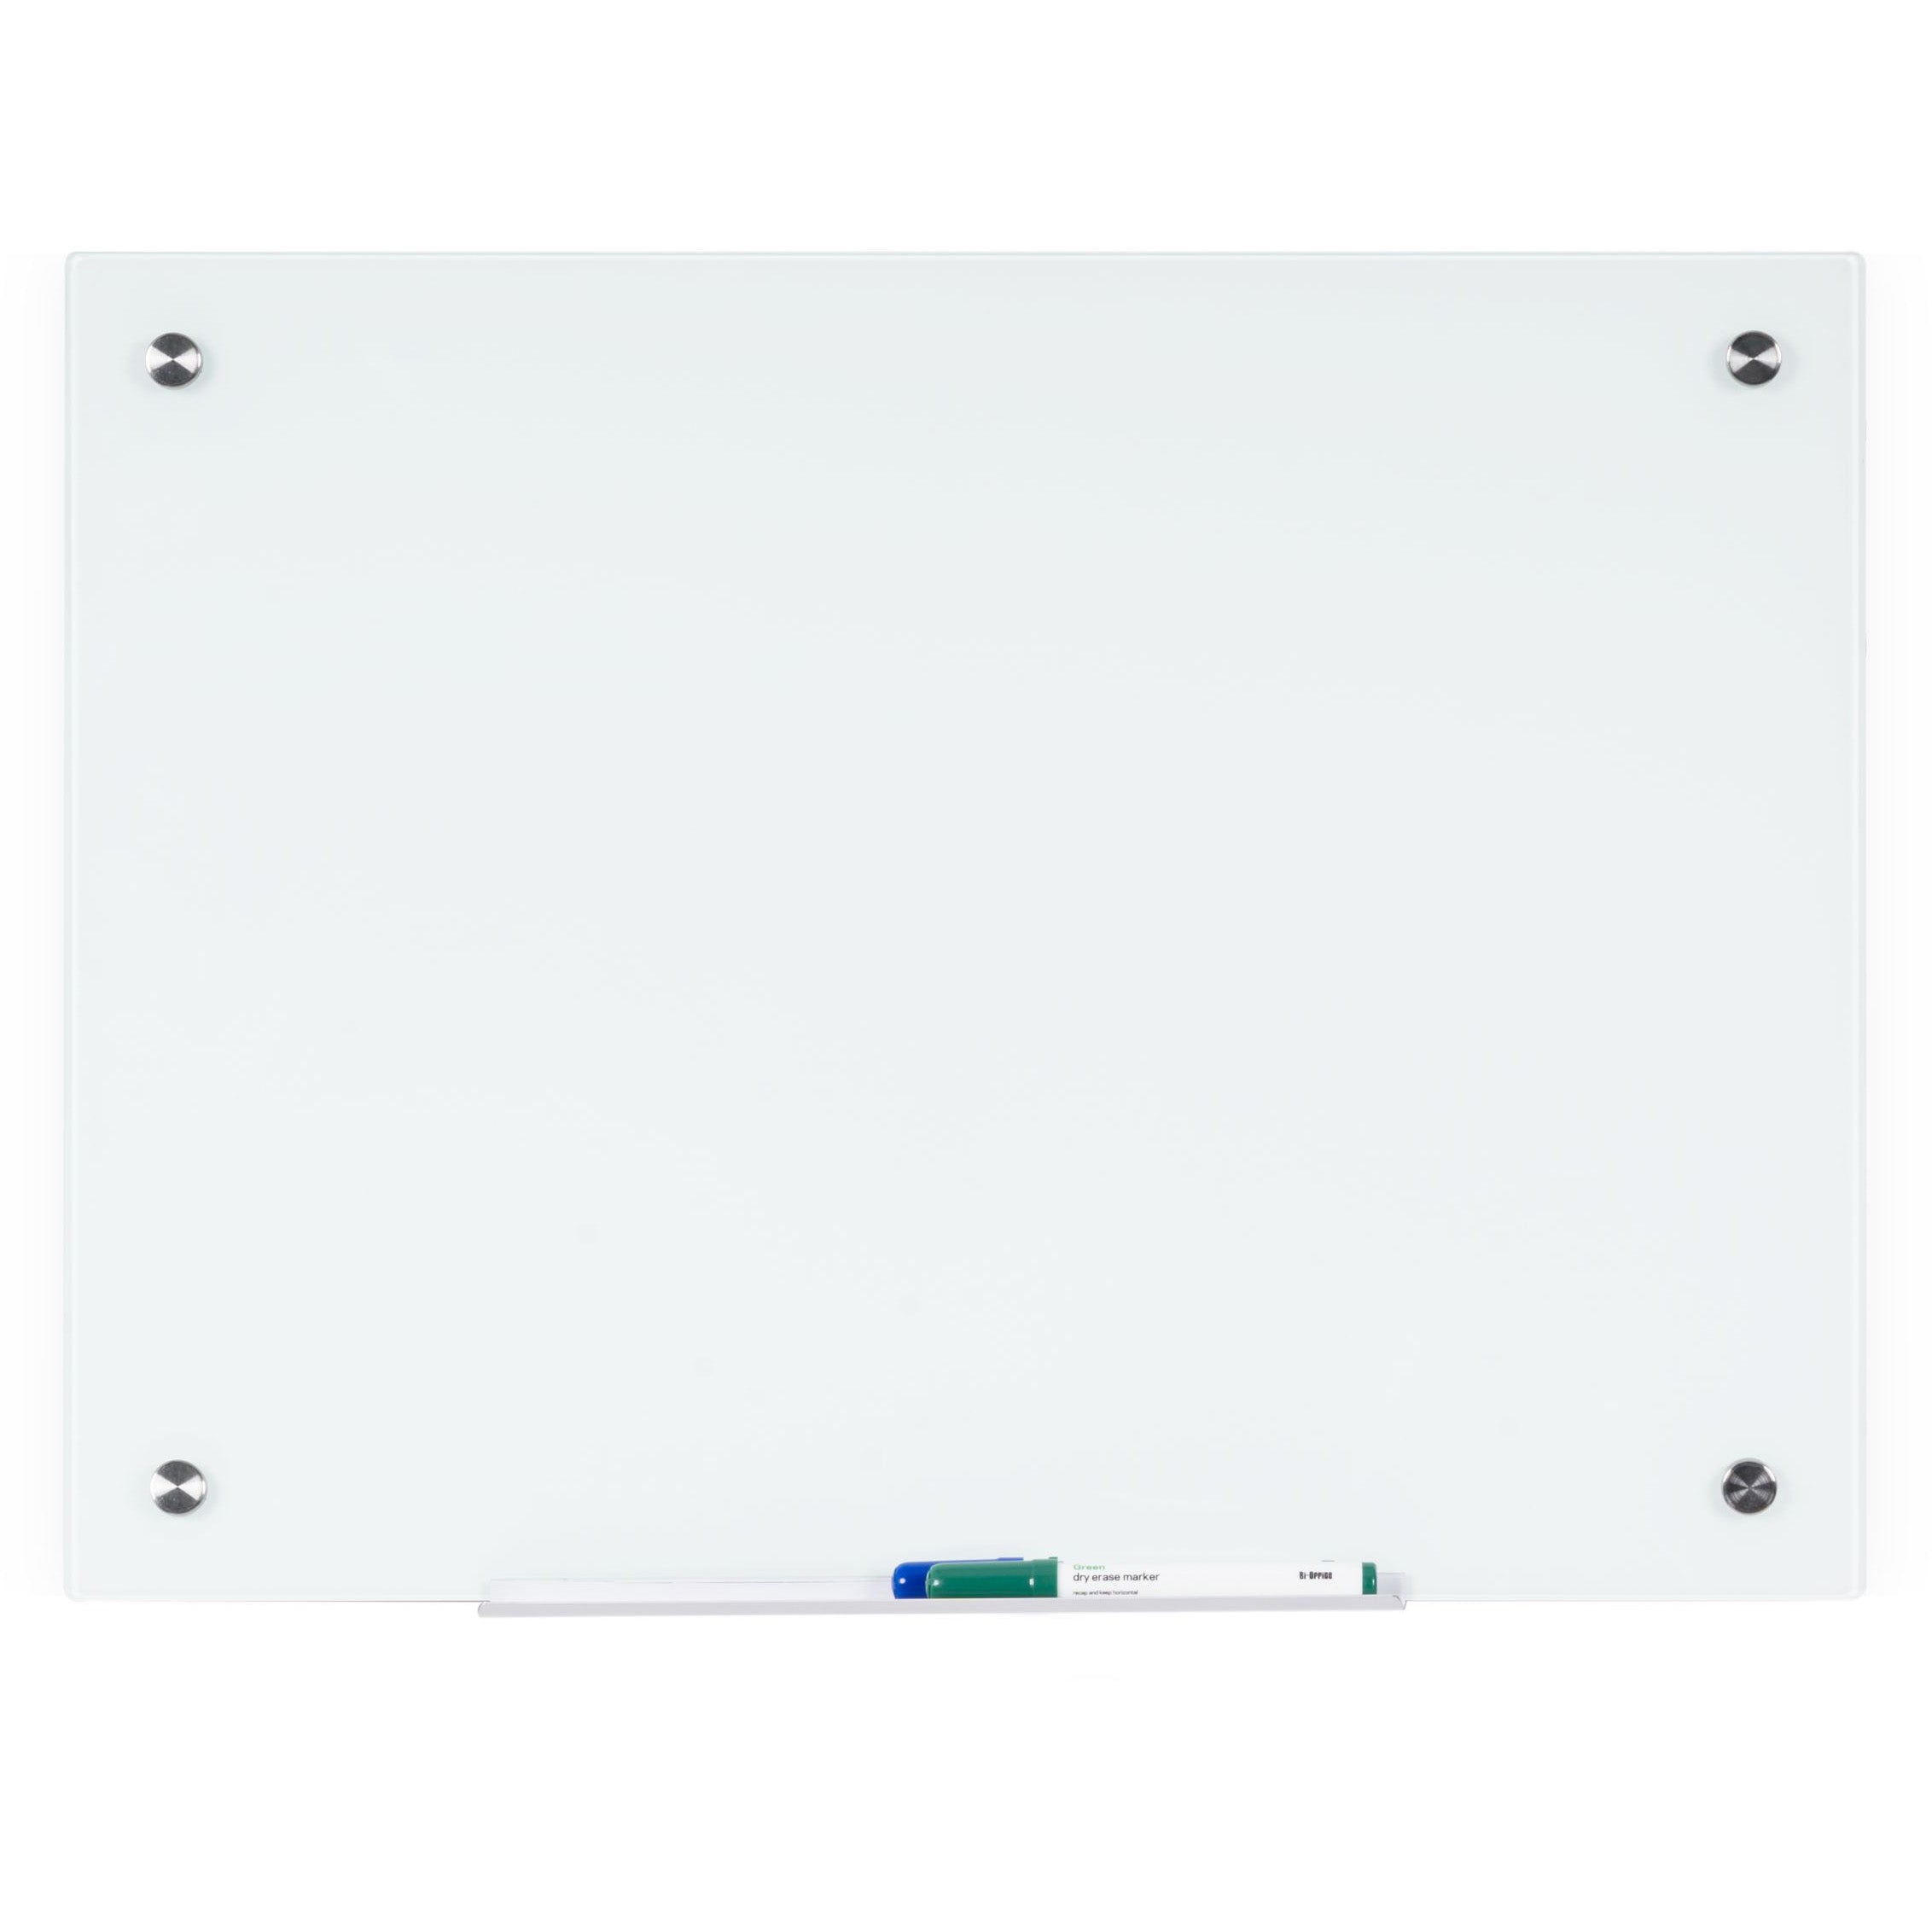 GL070107 River Magnetic Dry Erase Tempered Glass White Board, 24" x 36", Frameless Design, Wall Mount Kit Included by MasterVision